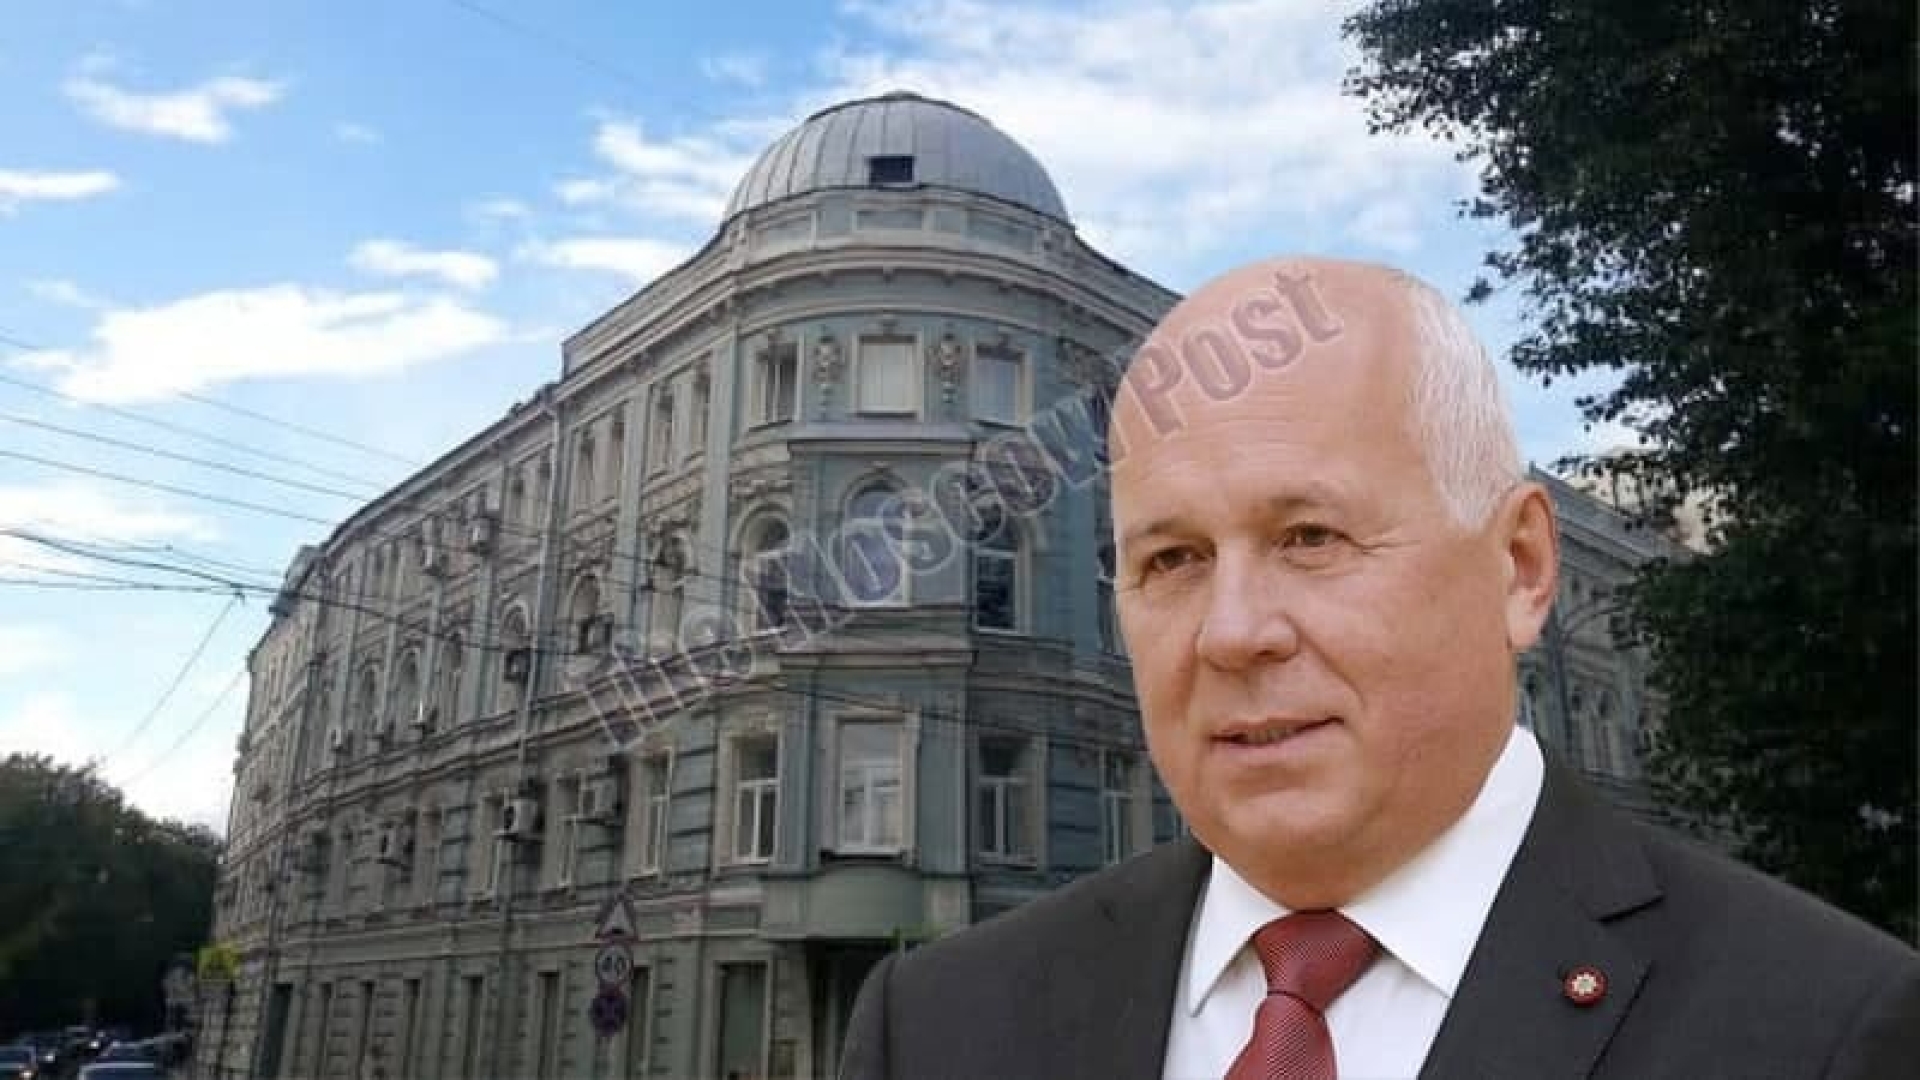 Road to the house: the head of Rostec bankrupted the institute to vacate a beautiful building?